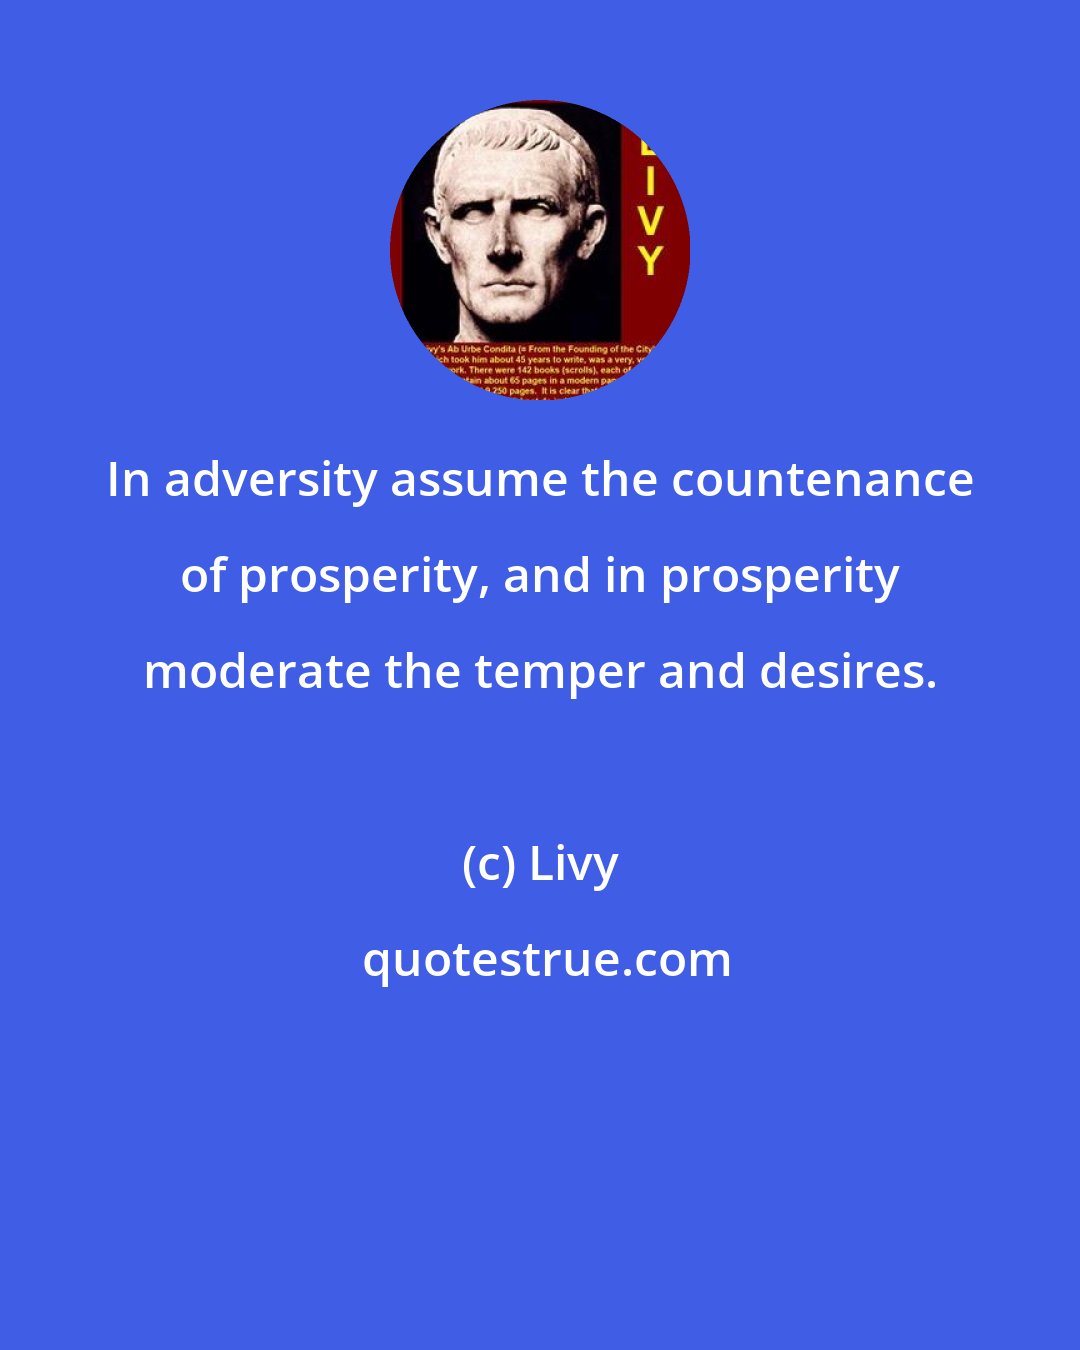 Livy: In adversity assume the countenance of prosperity, and in prosperity moderate the temper and desires.